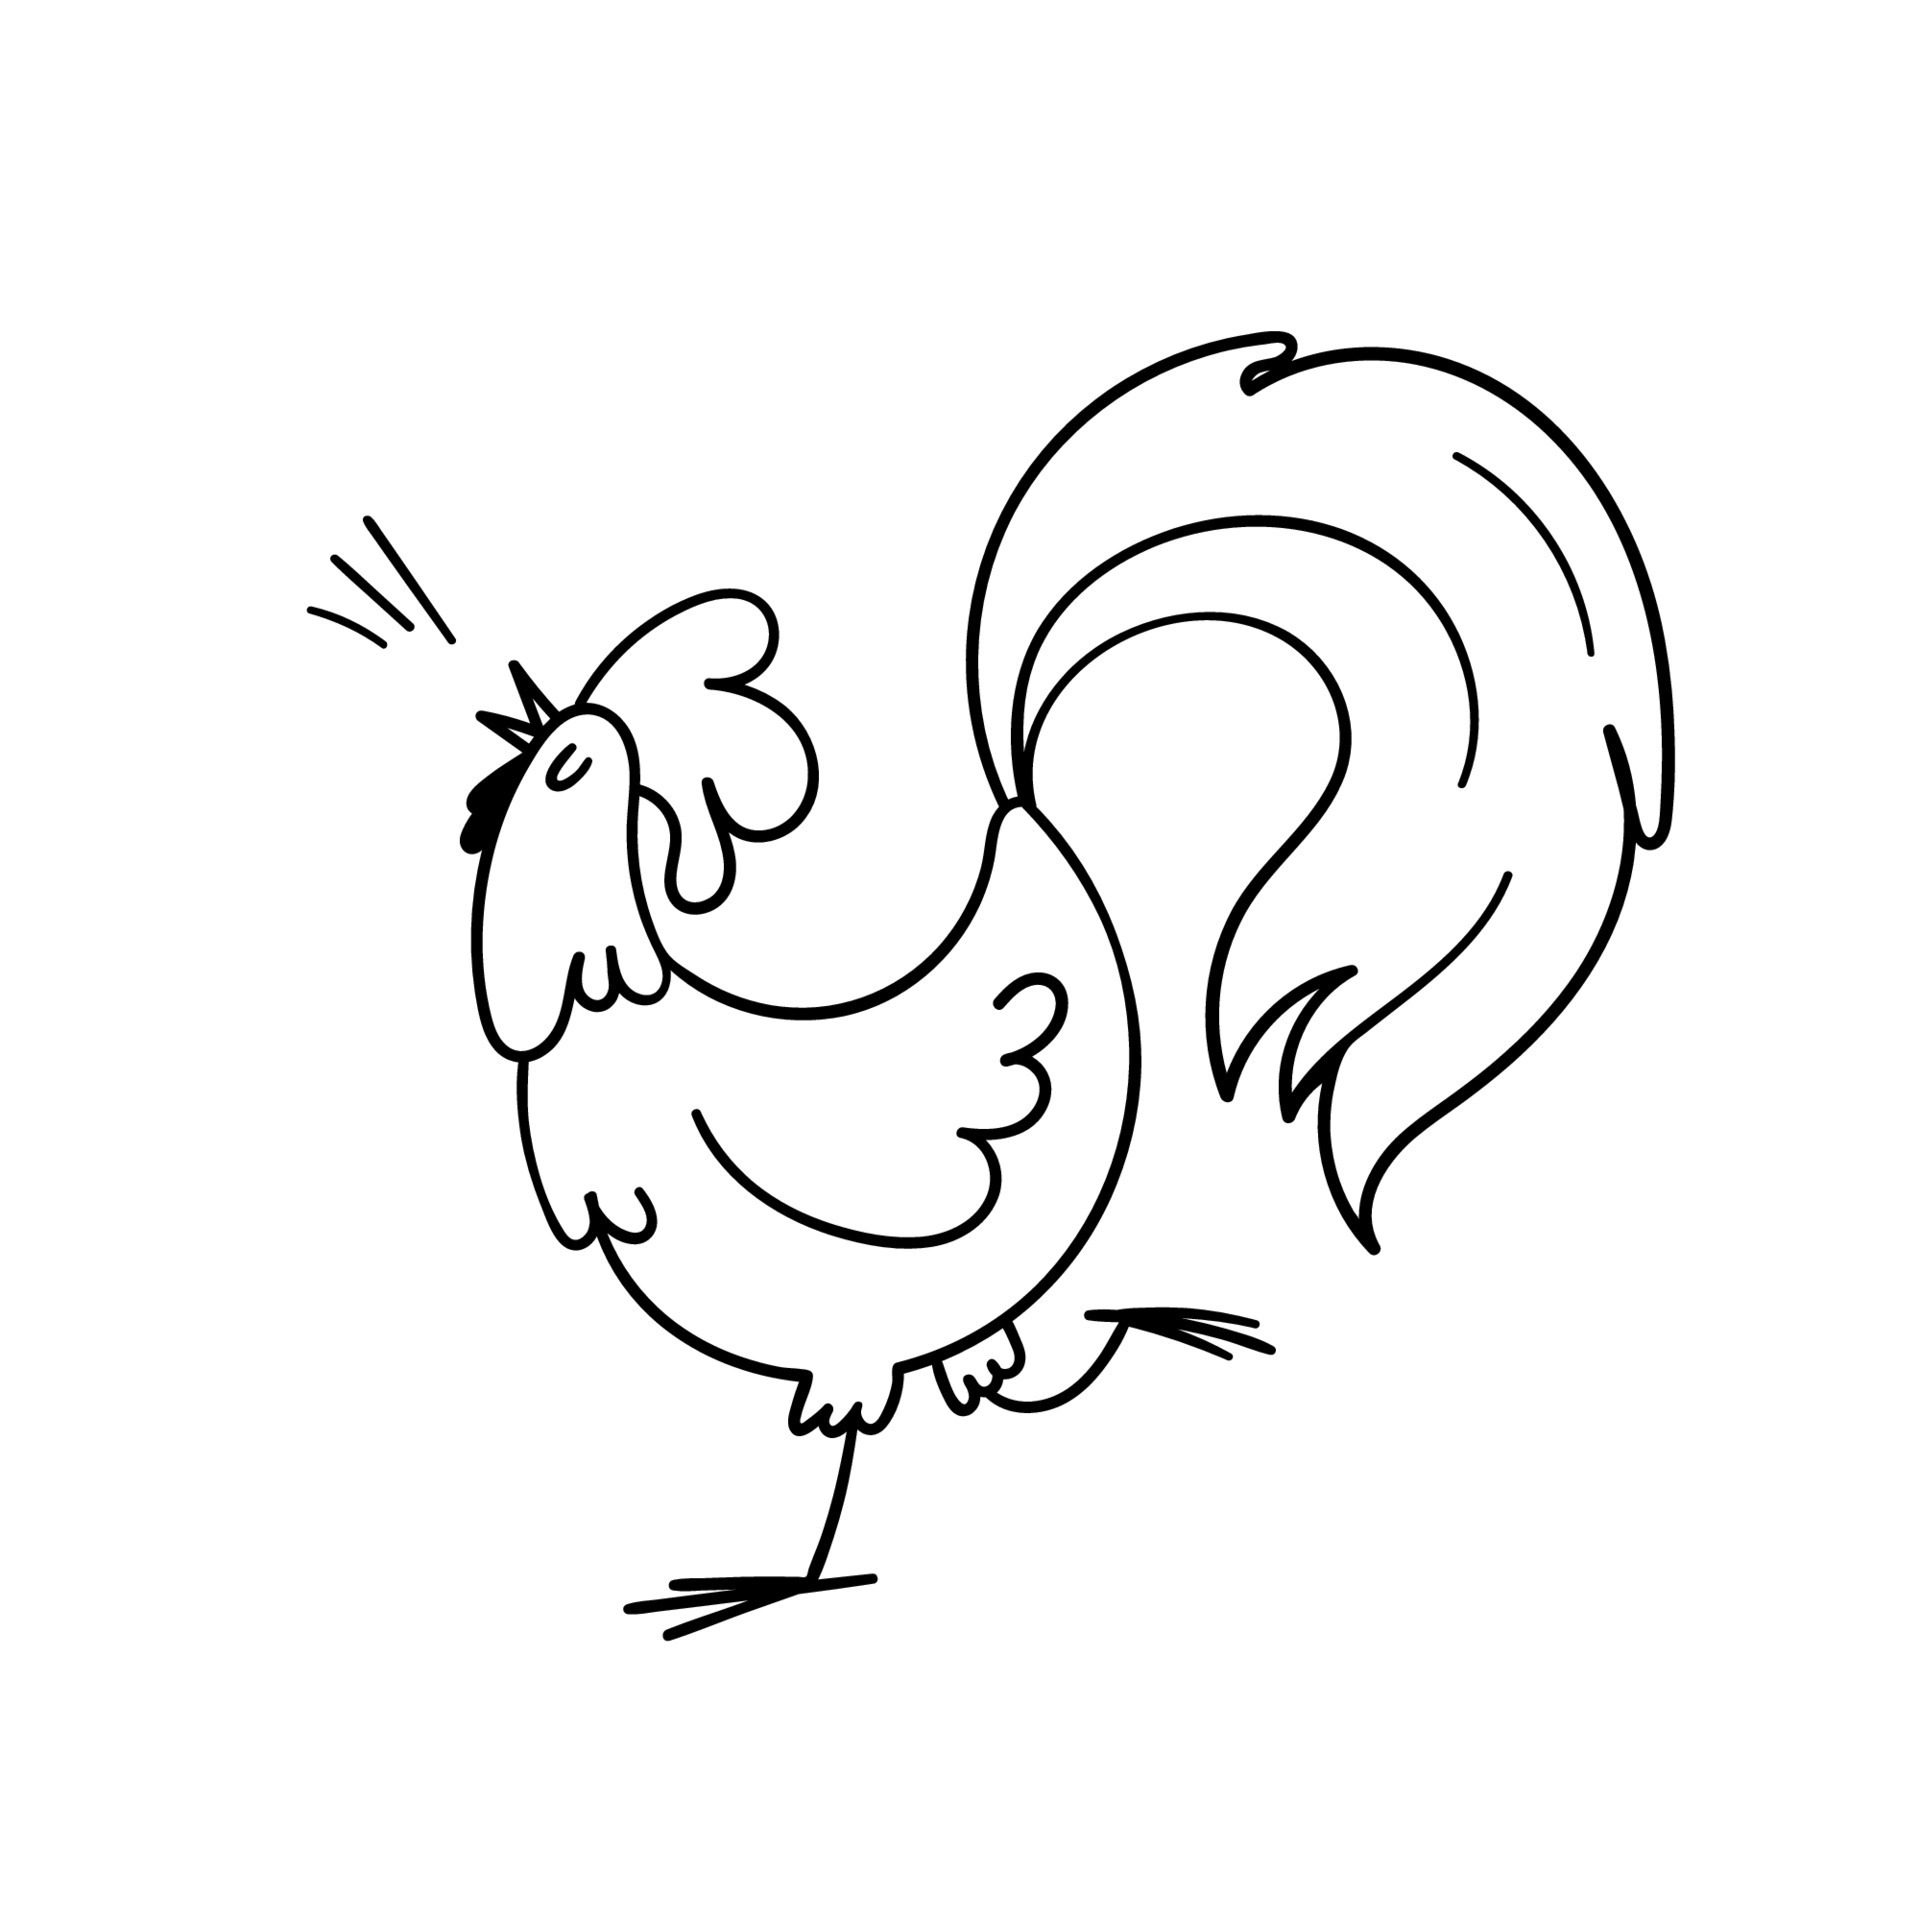 A hand-drawn rooster crows. Doodle rooster with a gorgeous tail